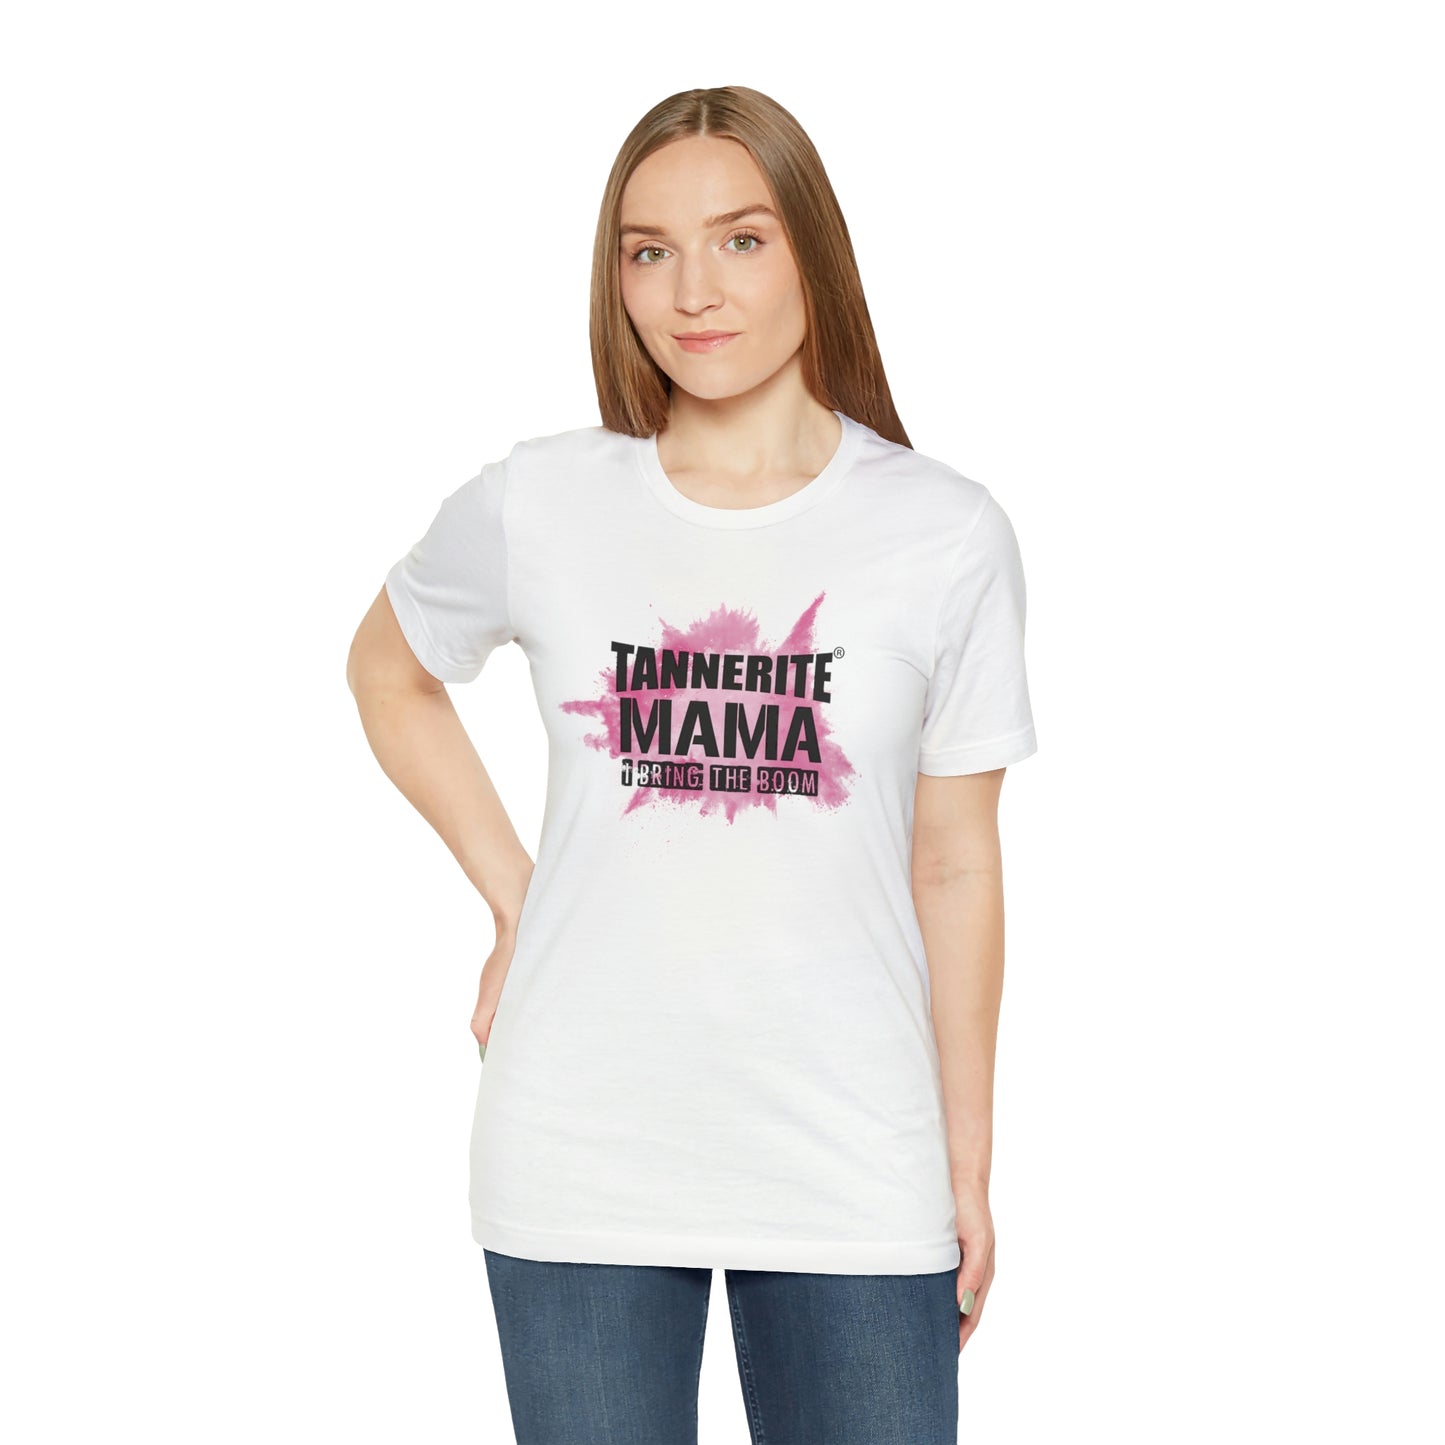 Tannerite® Mama - I bring the BOOM Jersey Short Sleeve Tee